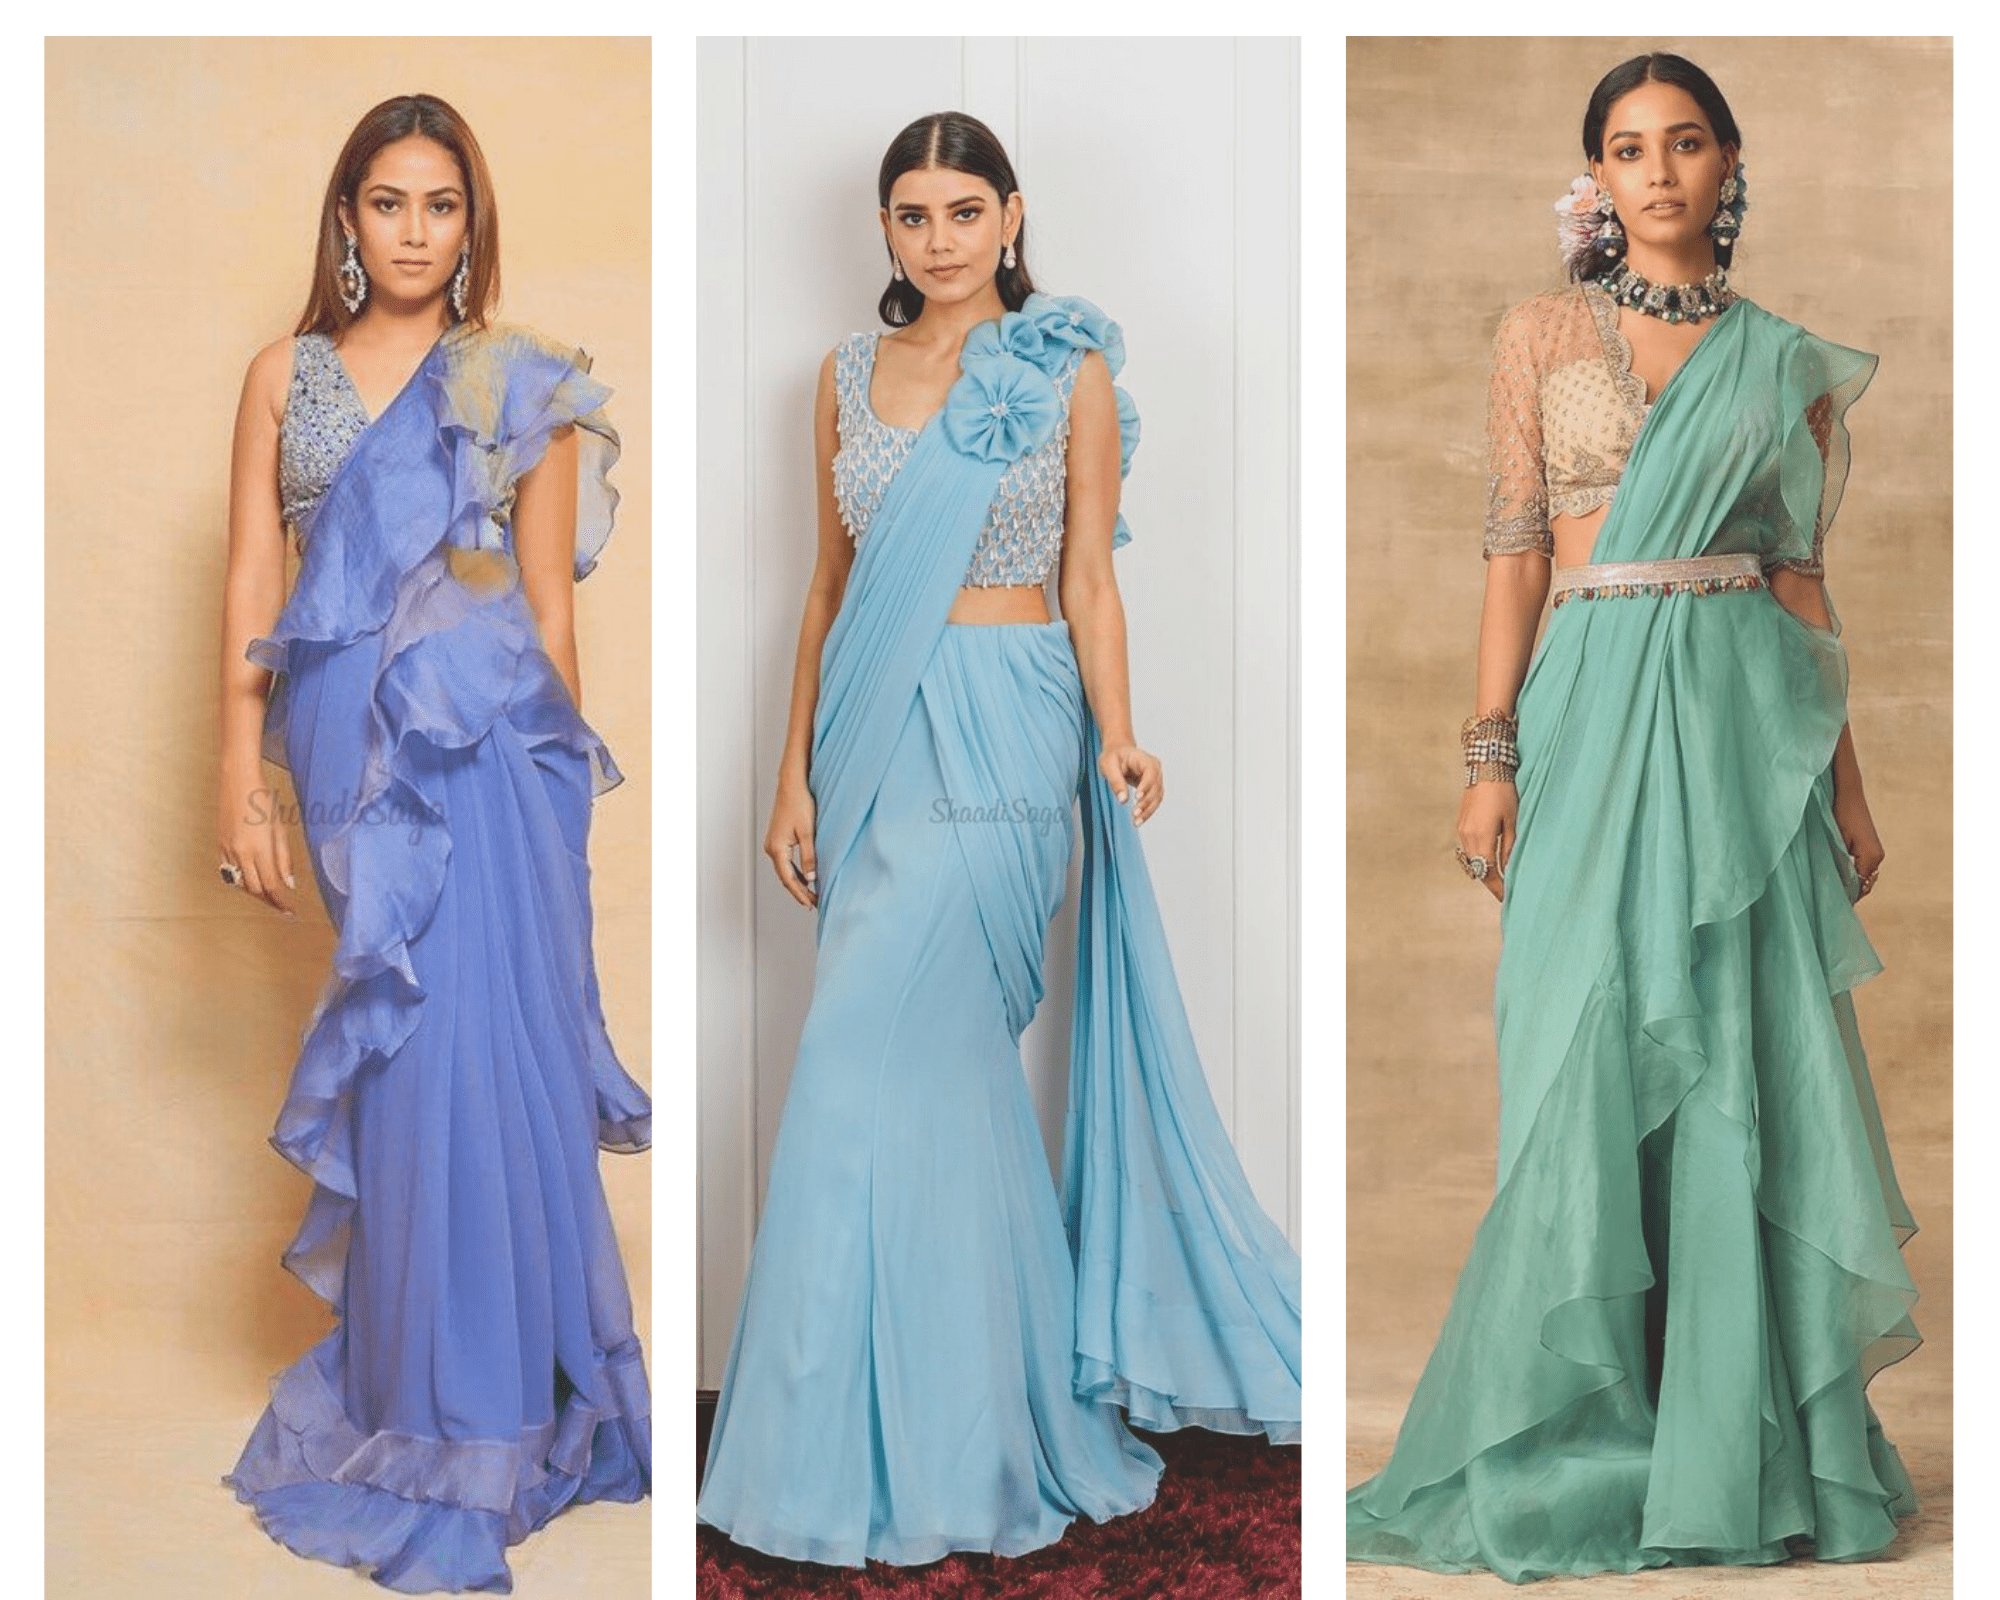 Complete Your Wardrobe with Colorful Sarees This Summer Season of 2021